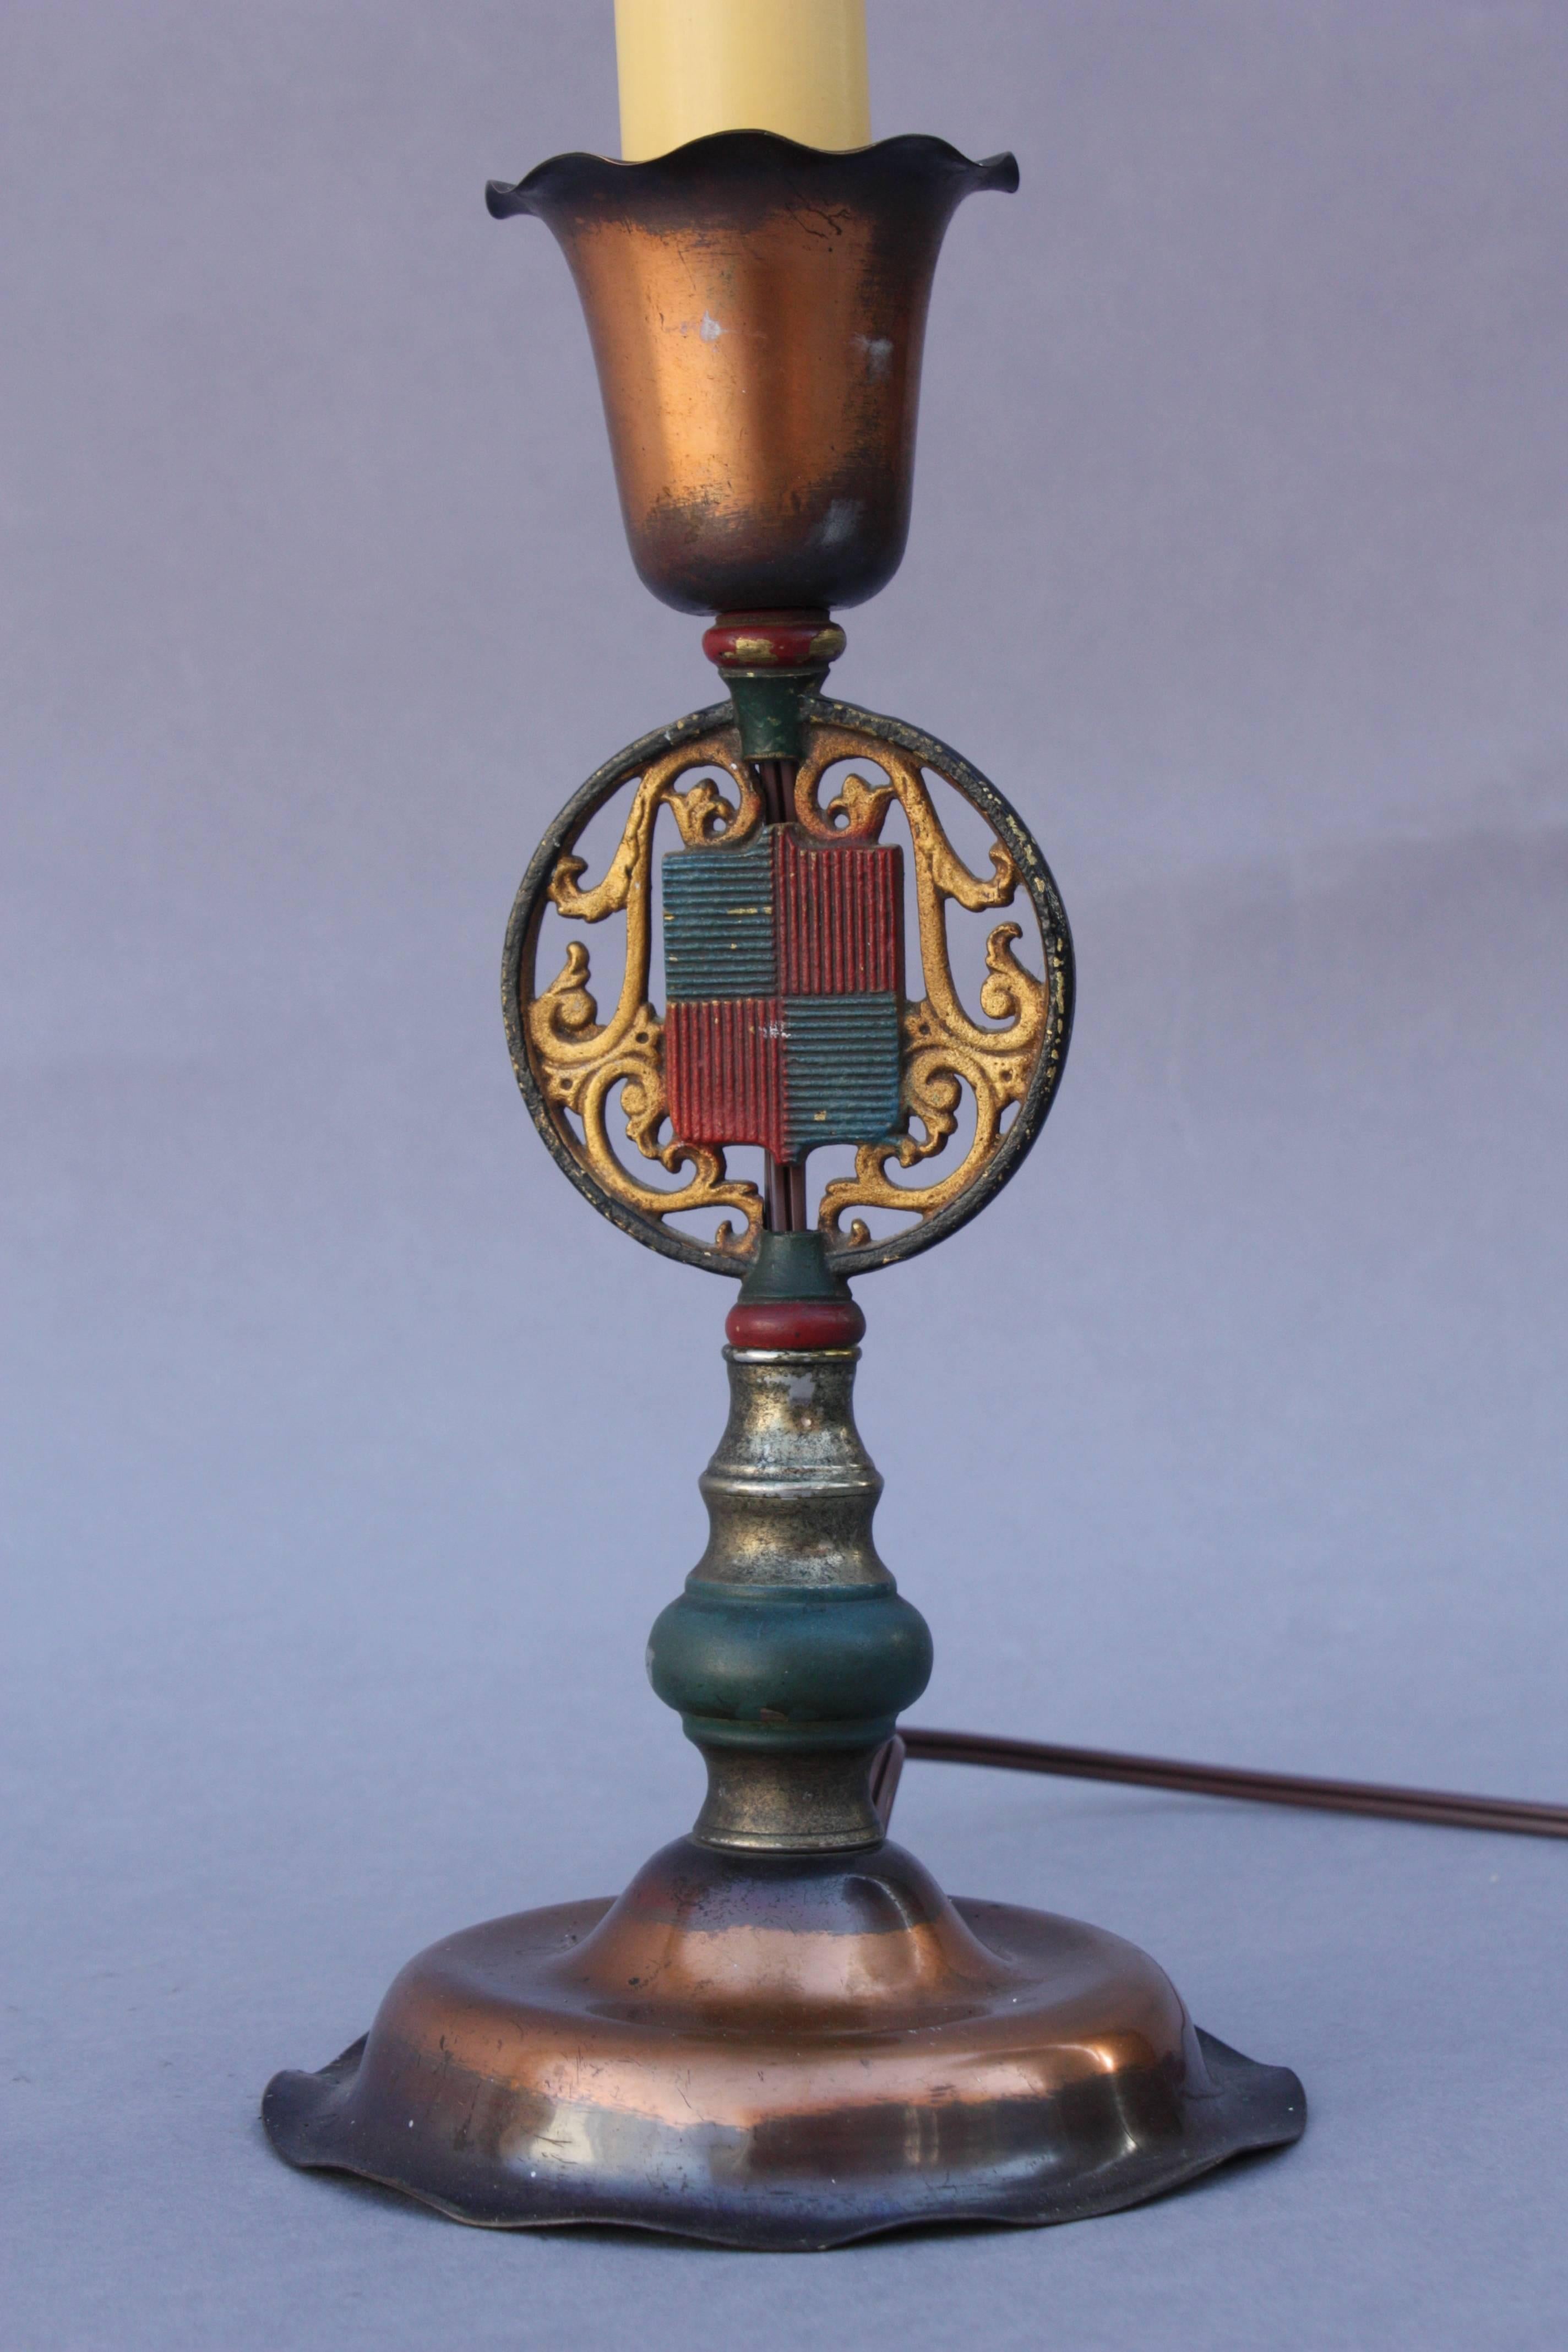 Spanish Revival table lamp with crest design, circa 1920s.